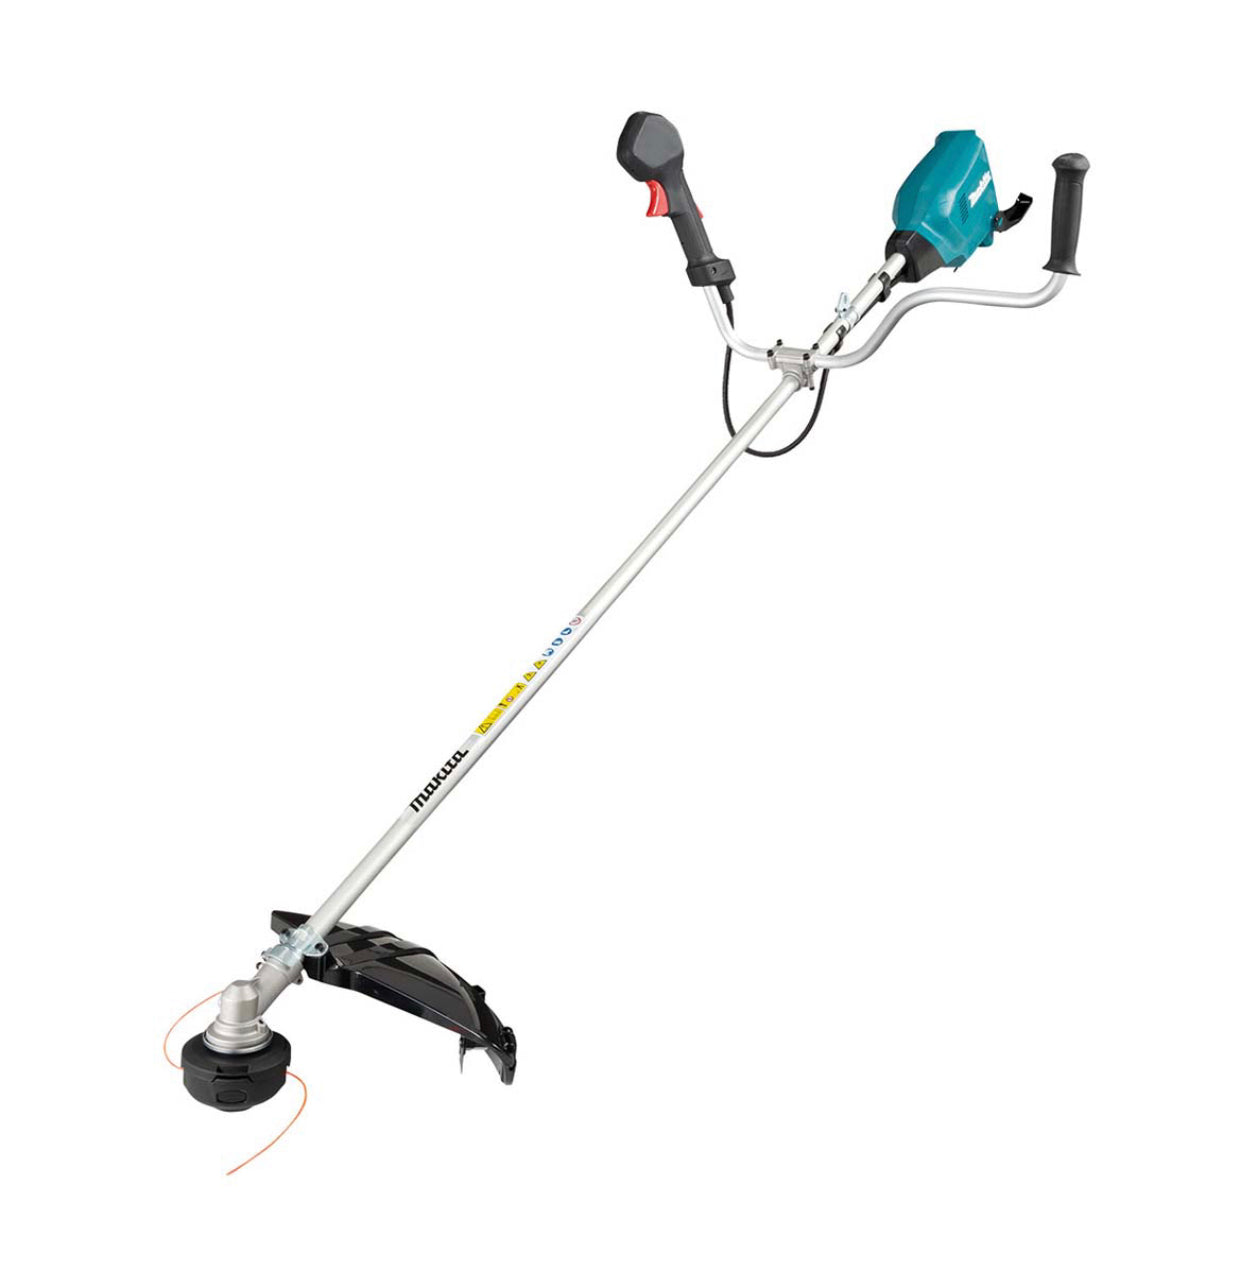 18Vx2 Brushless U Handle Line Trimmer Bare (Tool Only) DUR369AZ by Makita